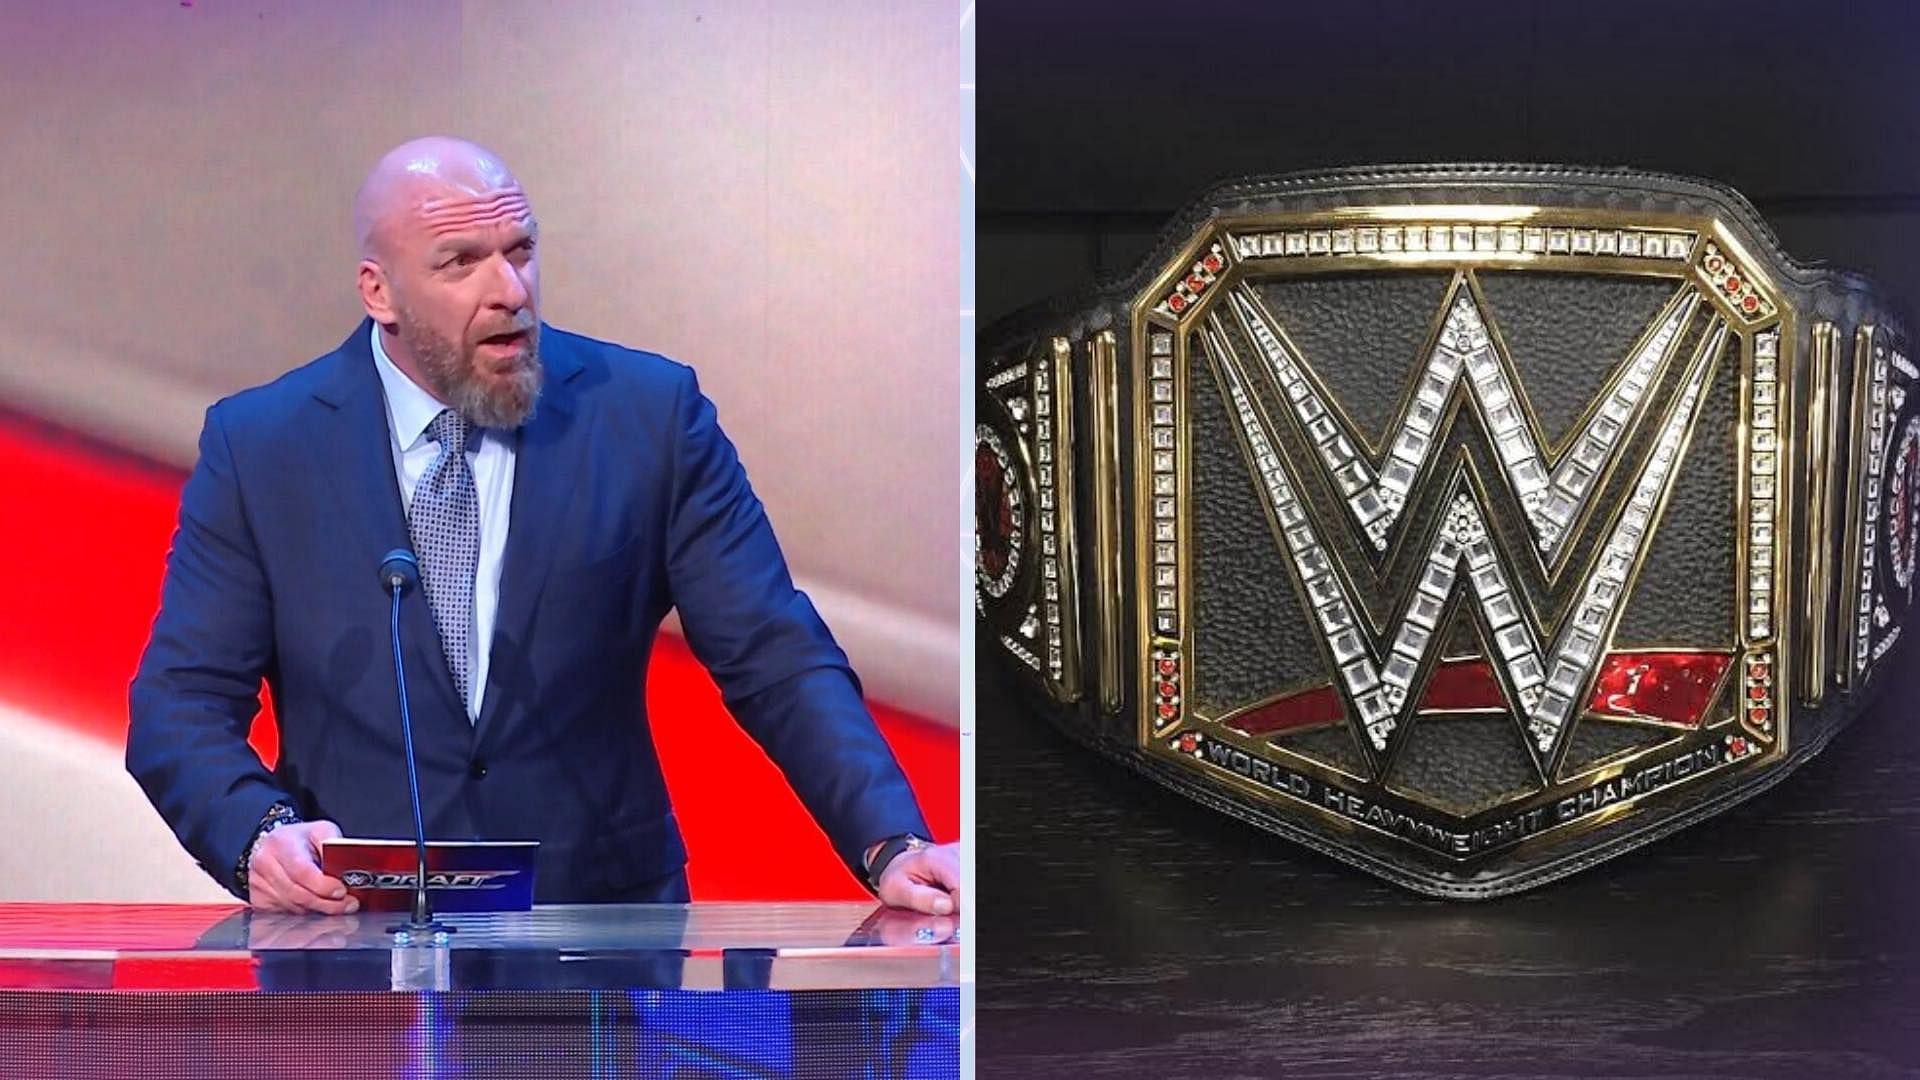 Triple H announced a few WWE Superstars during the 2023 draft.